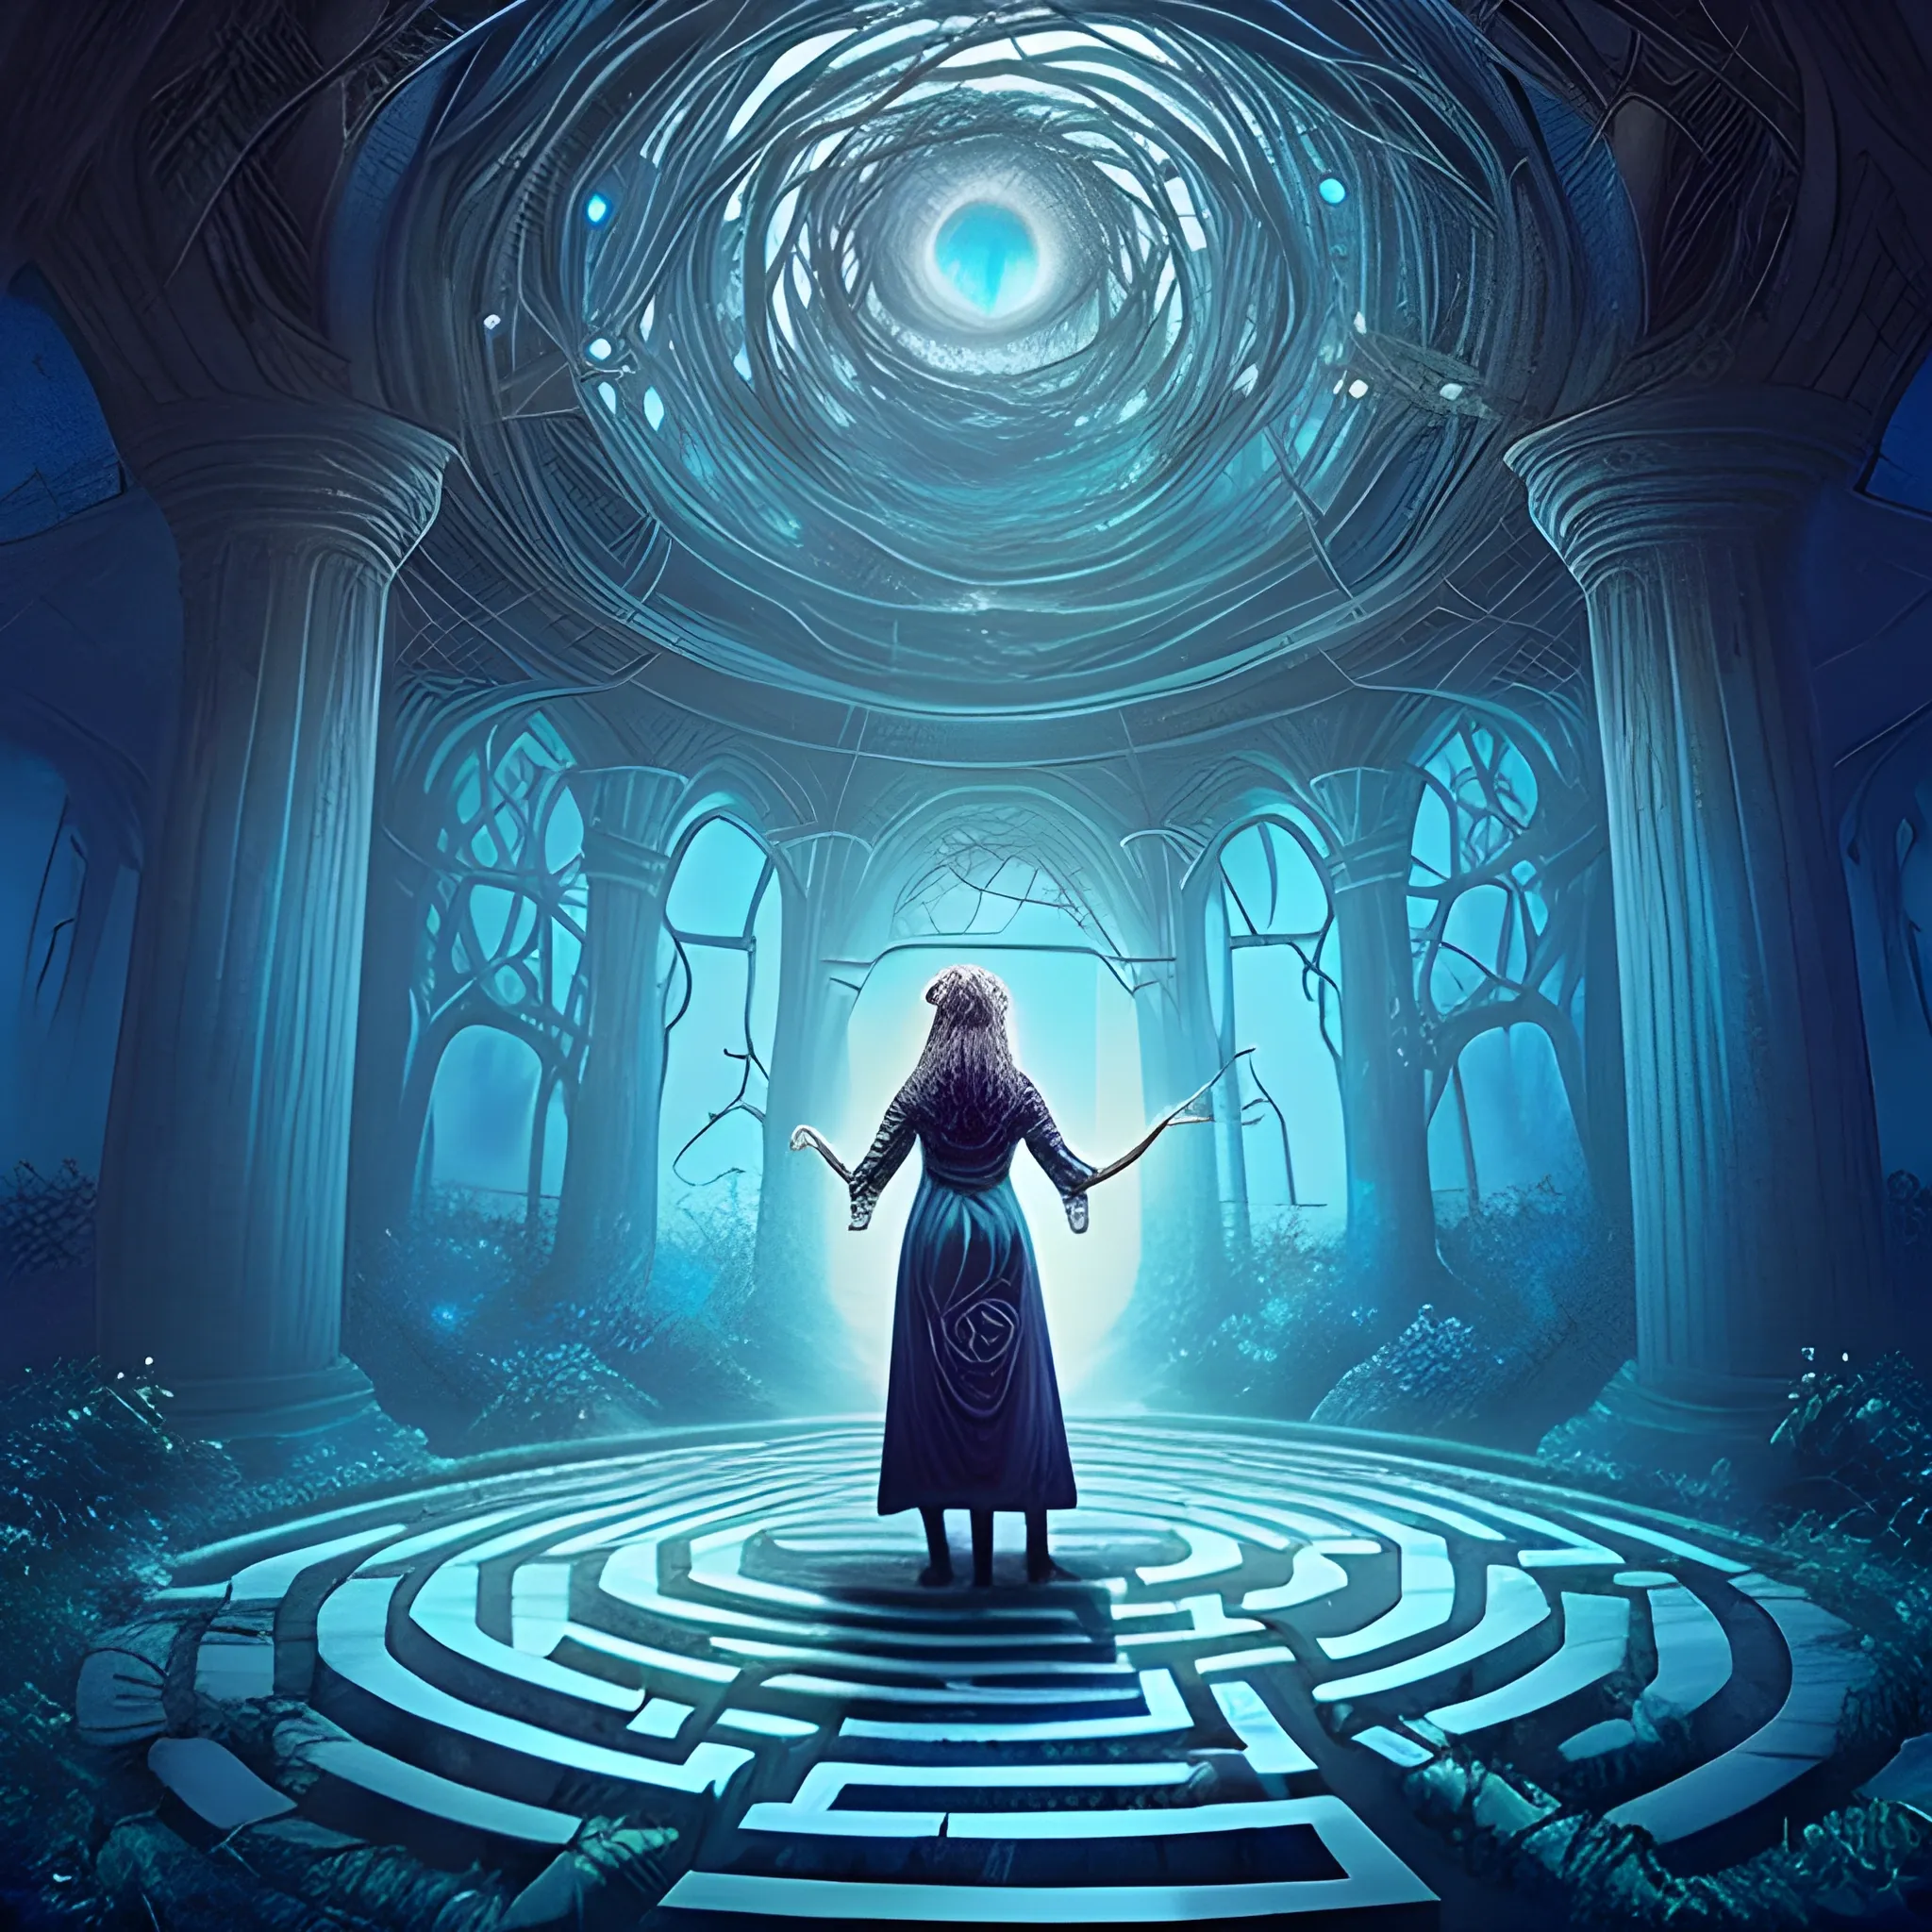 Lost amidst the labyrinth of time, a forgotten melody echoes in the depths of my soul. The harmonious symphony of magic and music intertwines, lighting a path to forgotten realms. Let the adventure begin!